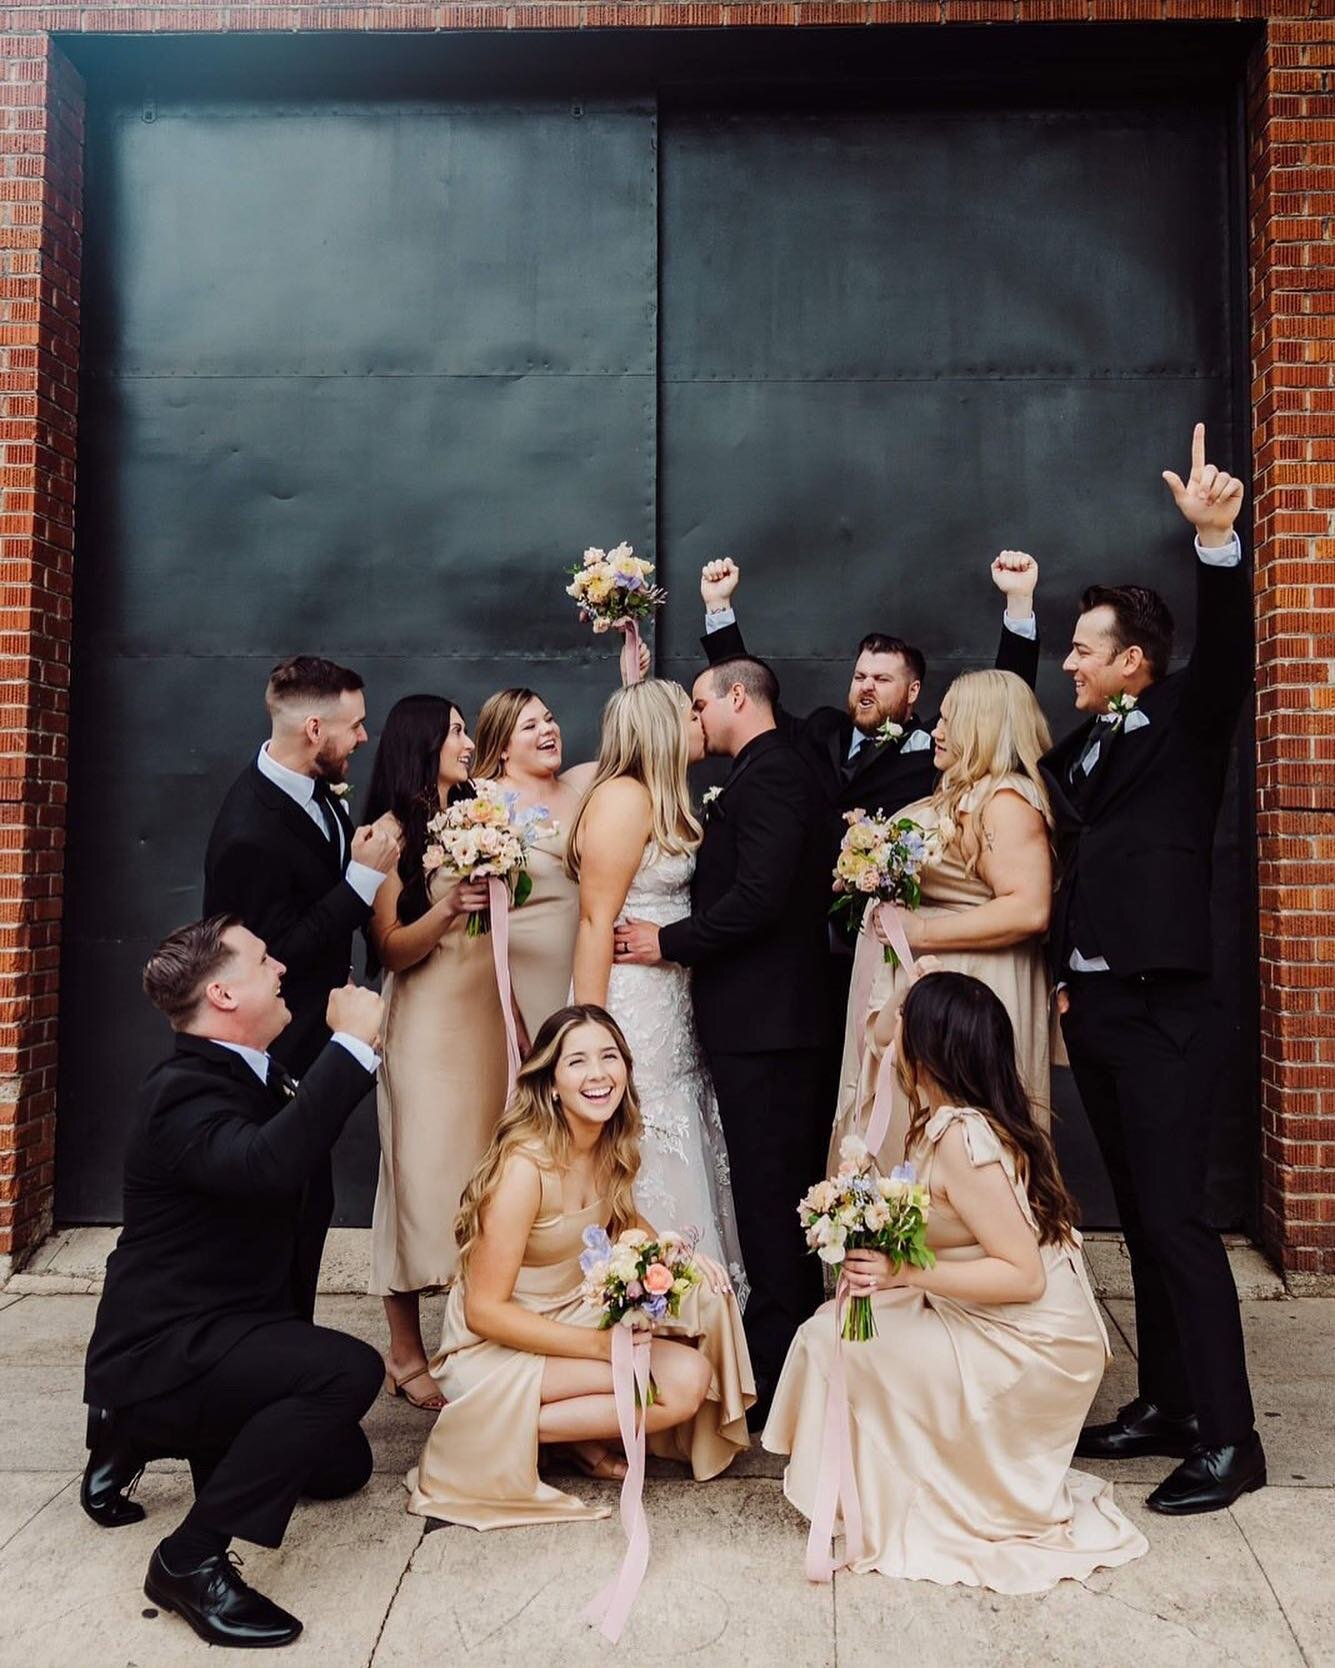 Nothing like being surrounded by your nearest and dearest on your wedding day!

Photography @wendycarrphotography 
Coordination @thepennyslo 
Florals @bloomsofsantabarbara 

#downtownslo #bridalparty #thepennyslo #sanluisobispoweddings #sanluisobidpo